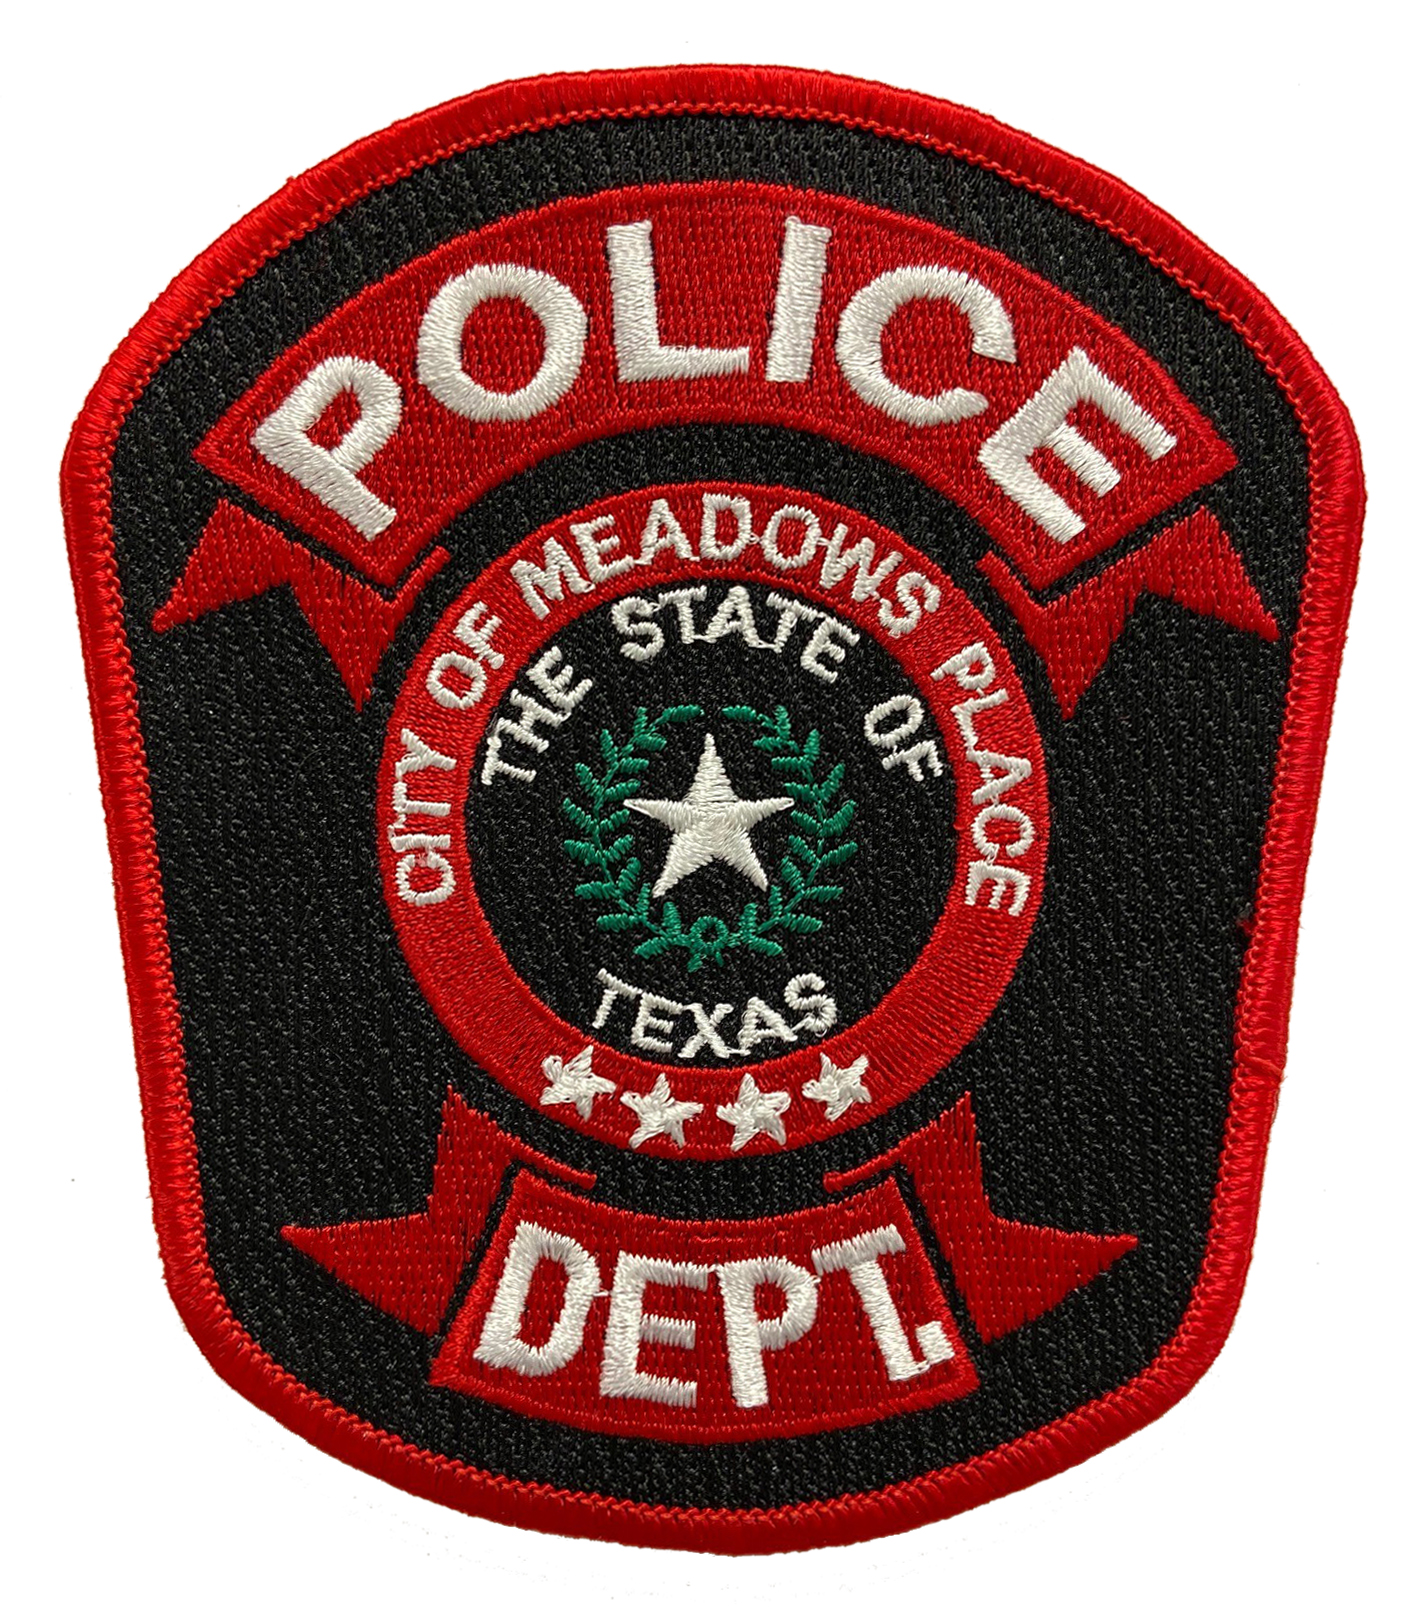 Meadows Place, Texas, Police Department — LEB